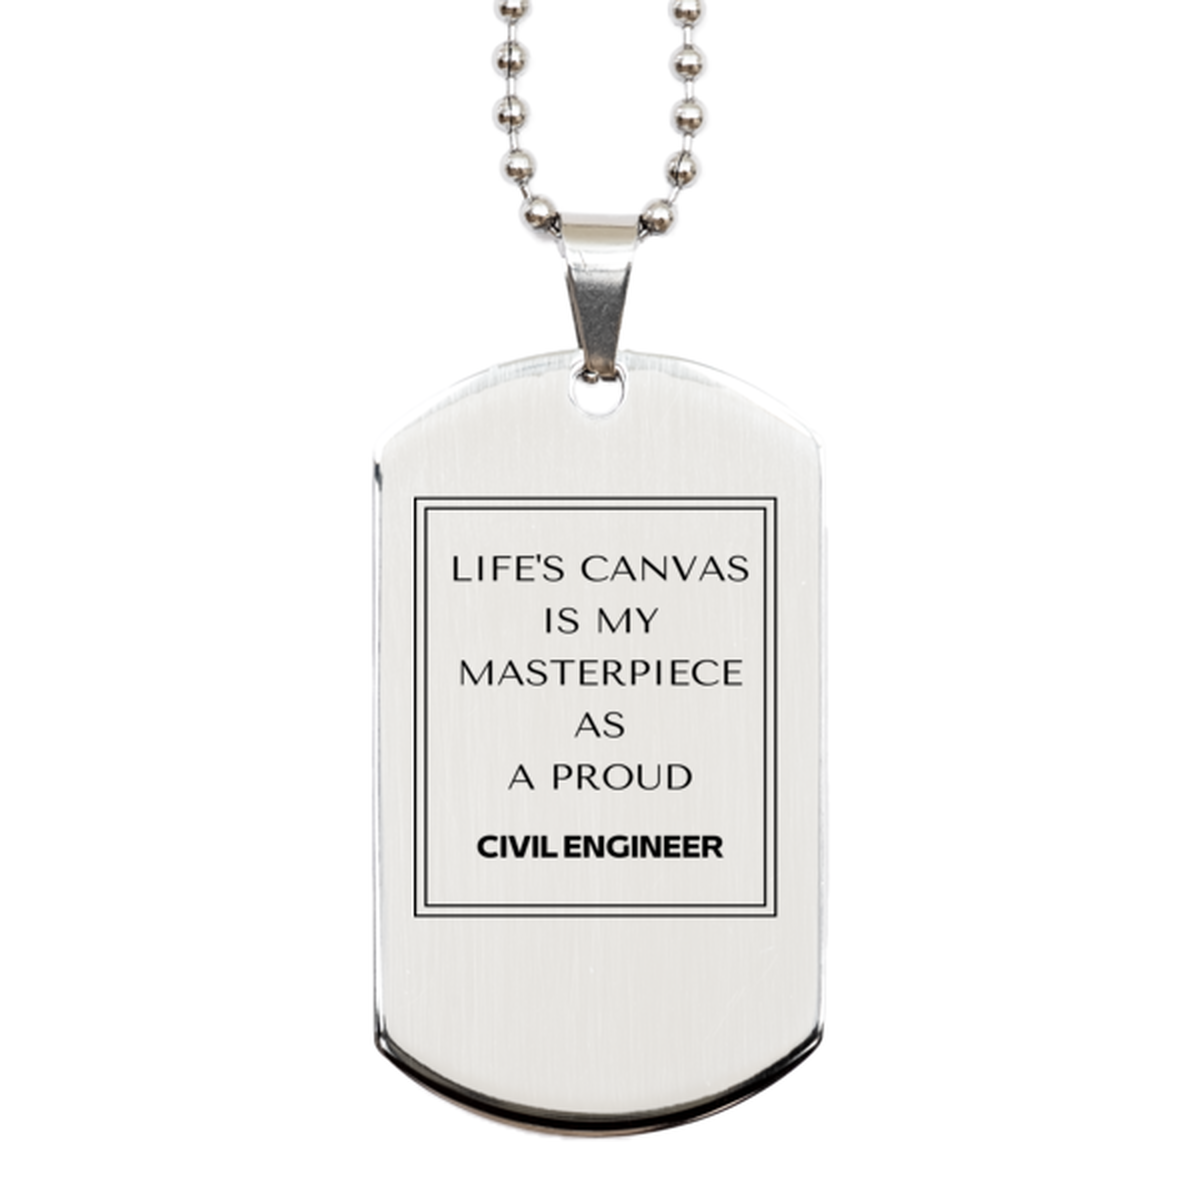 Proud Civil Engineer Gifts, Life's canvas is my masterpiece, Epic Birthday Christmas Unique Silver Dog Tag For Civil Engineer, Coworkers, Men, Women, Friends